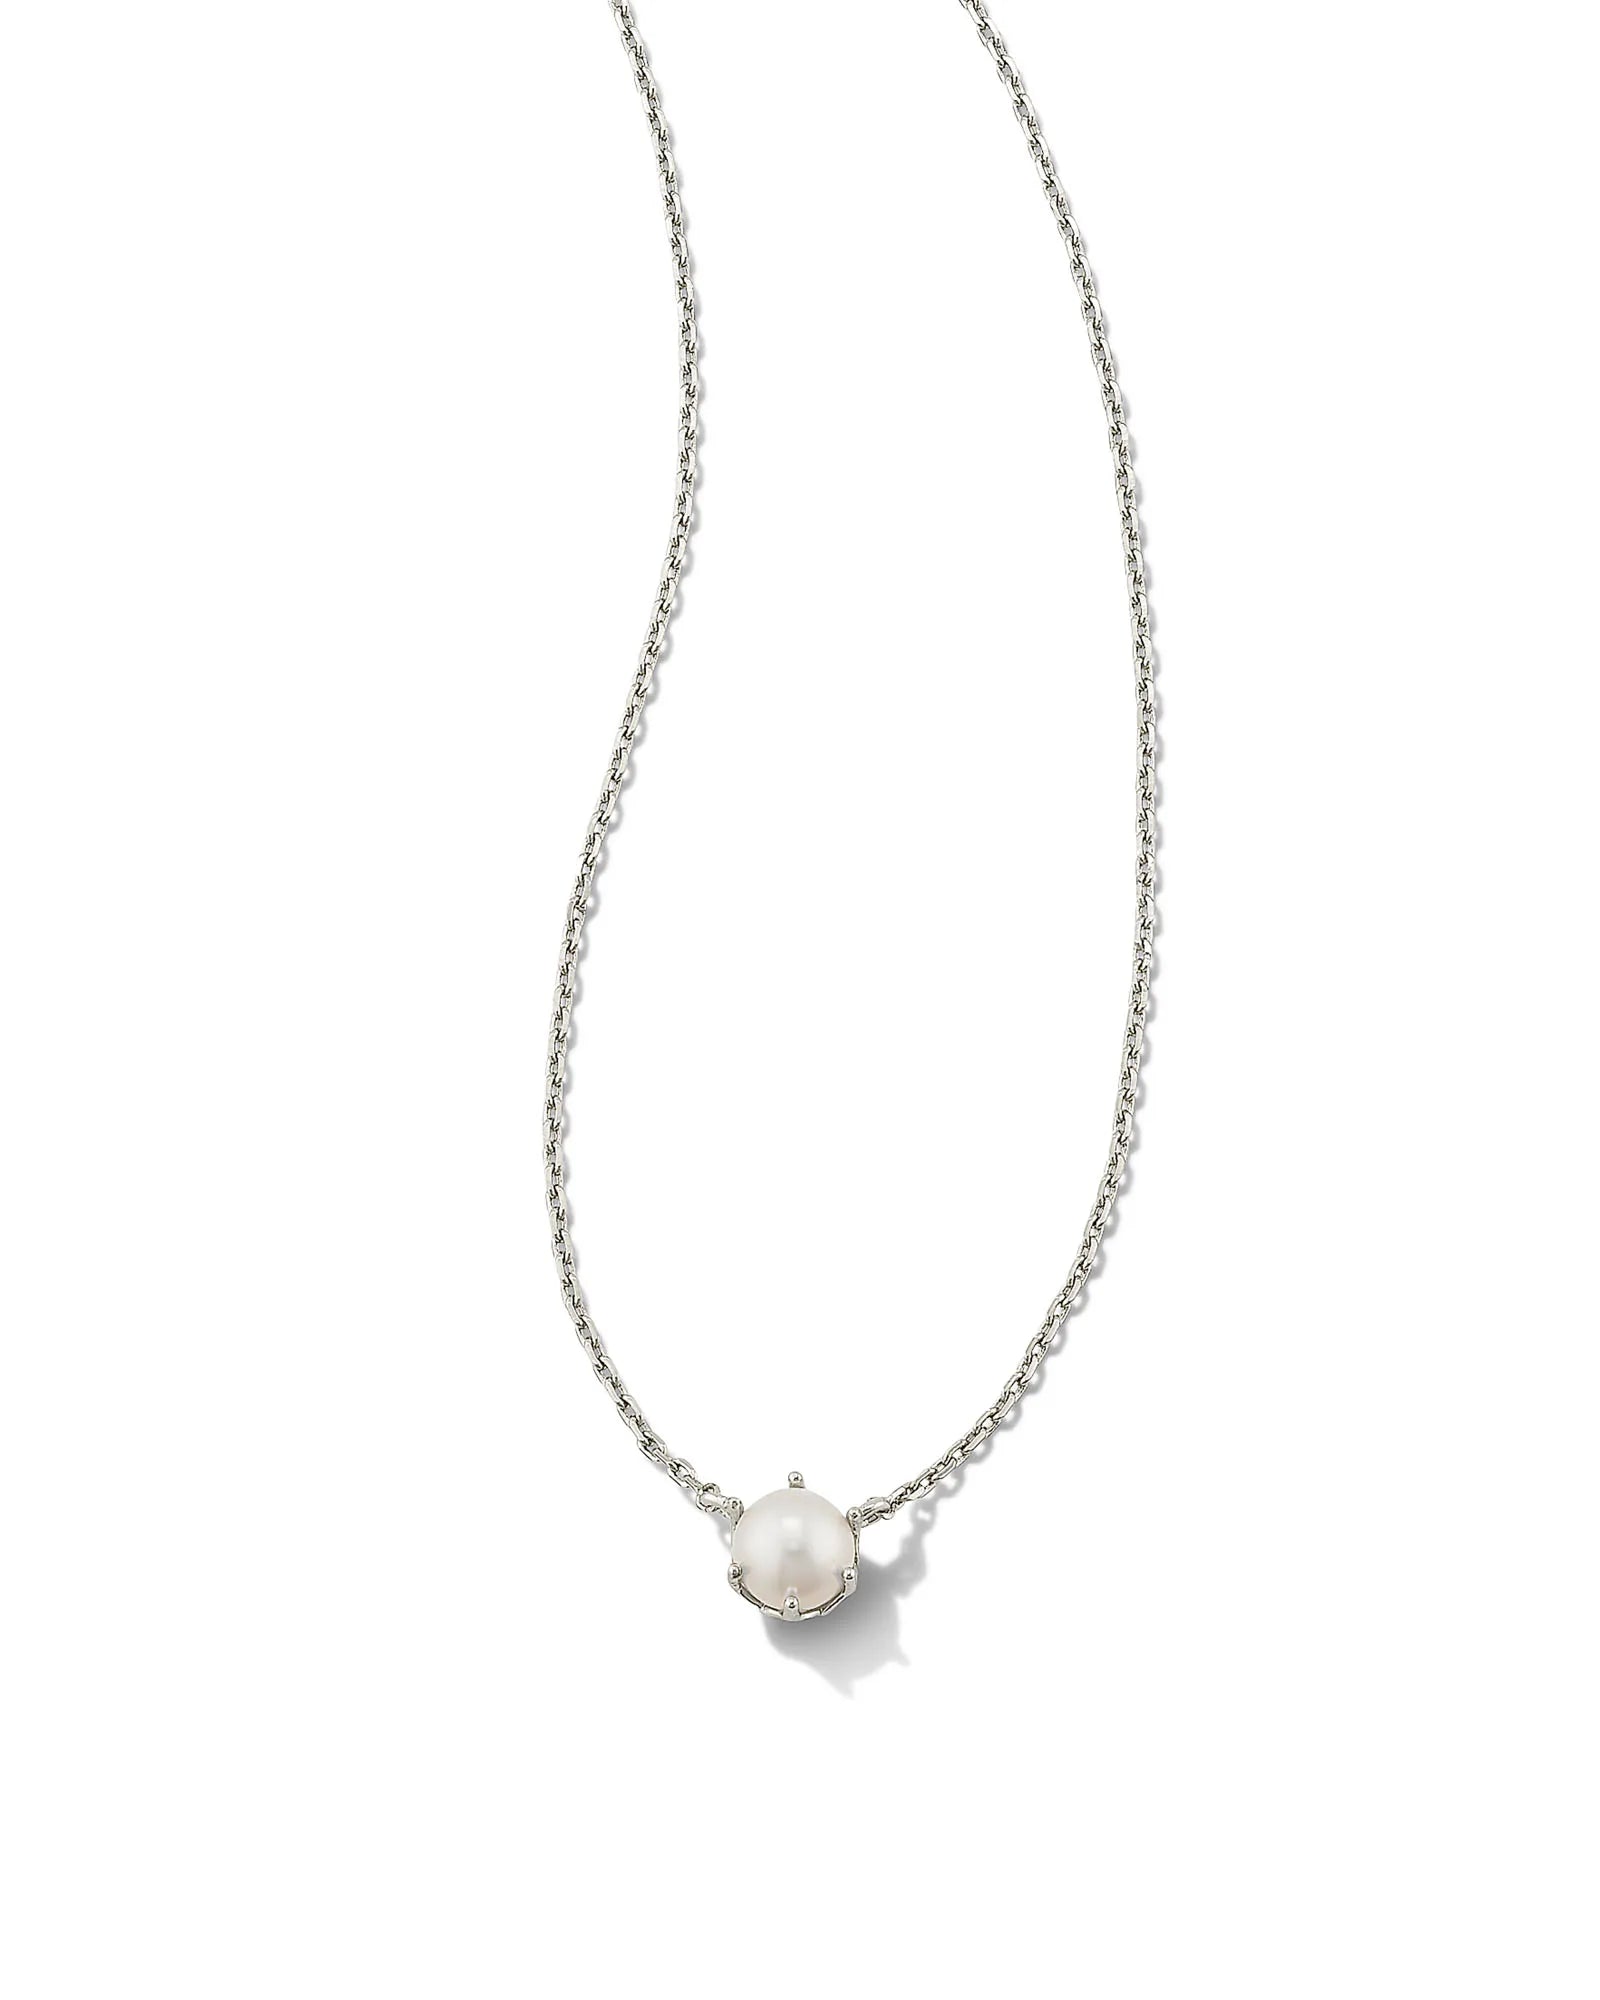 This white pearl pendant necklace by Kendra Scott is placed on a white background.